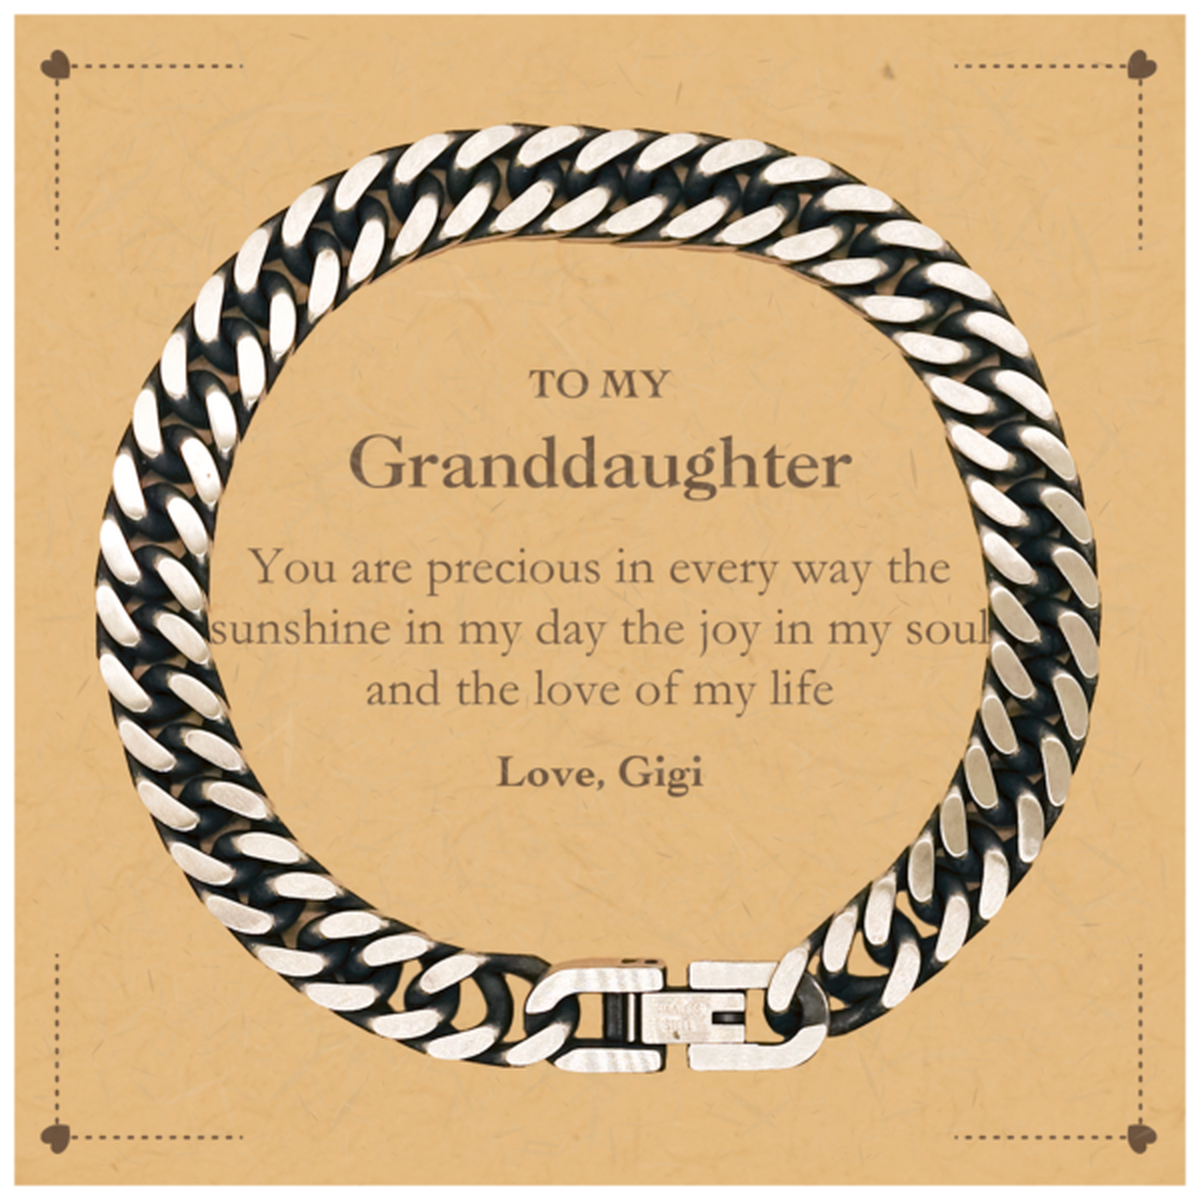 Graduation Gifts for Granddaughter Cuban Link Chain Bracelet Present from Gigi, Christmas Granddaughter Birthday Gifts Granddaughter You are precious in every way the sunshine in my day. Love, Gigi